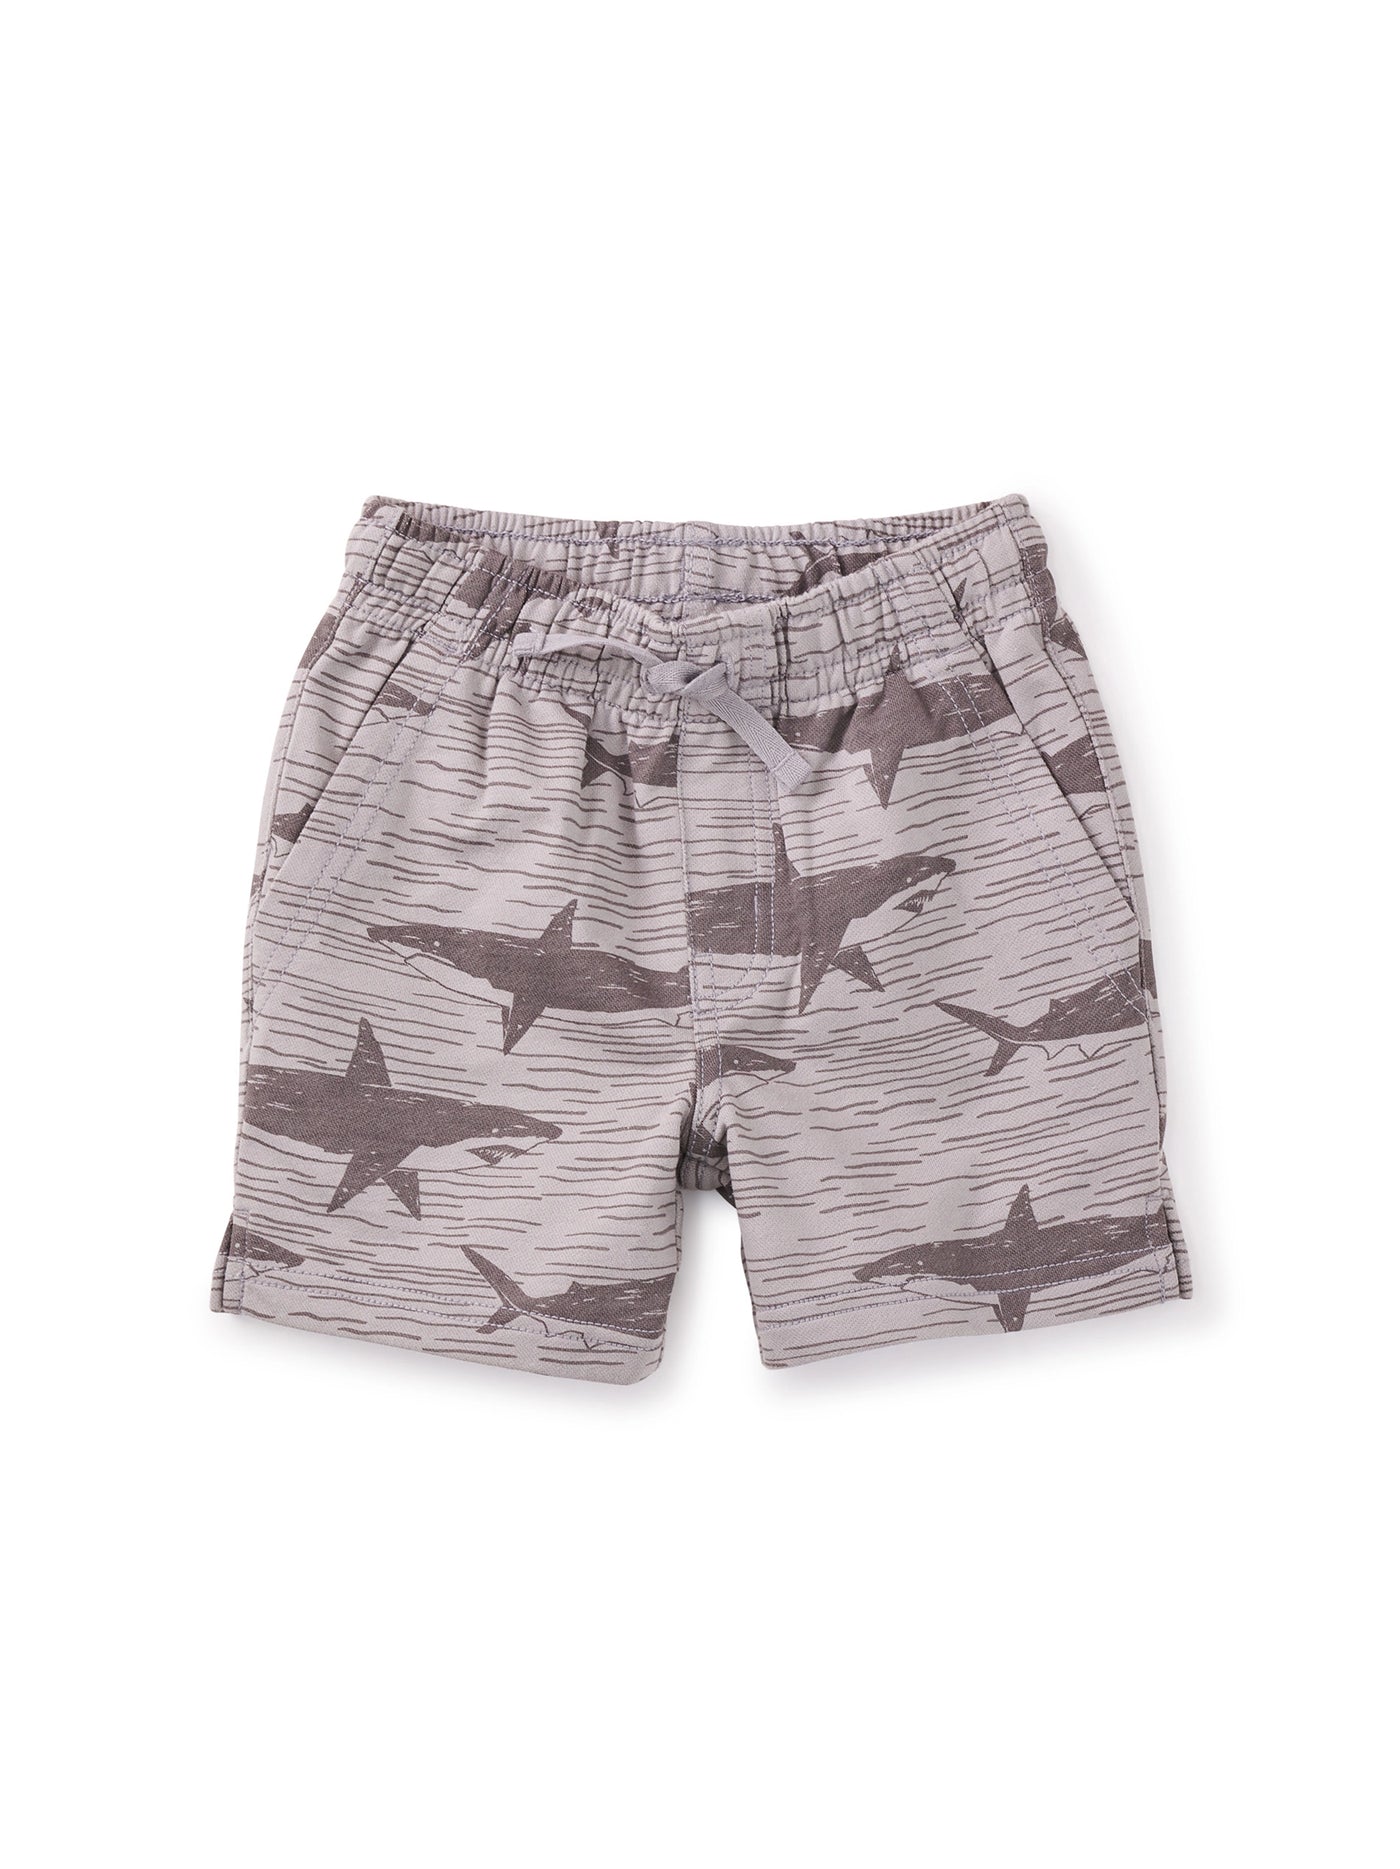 Printed Knit Shorties/Stealth Sharks